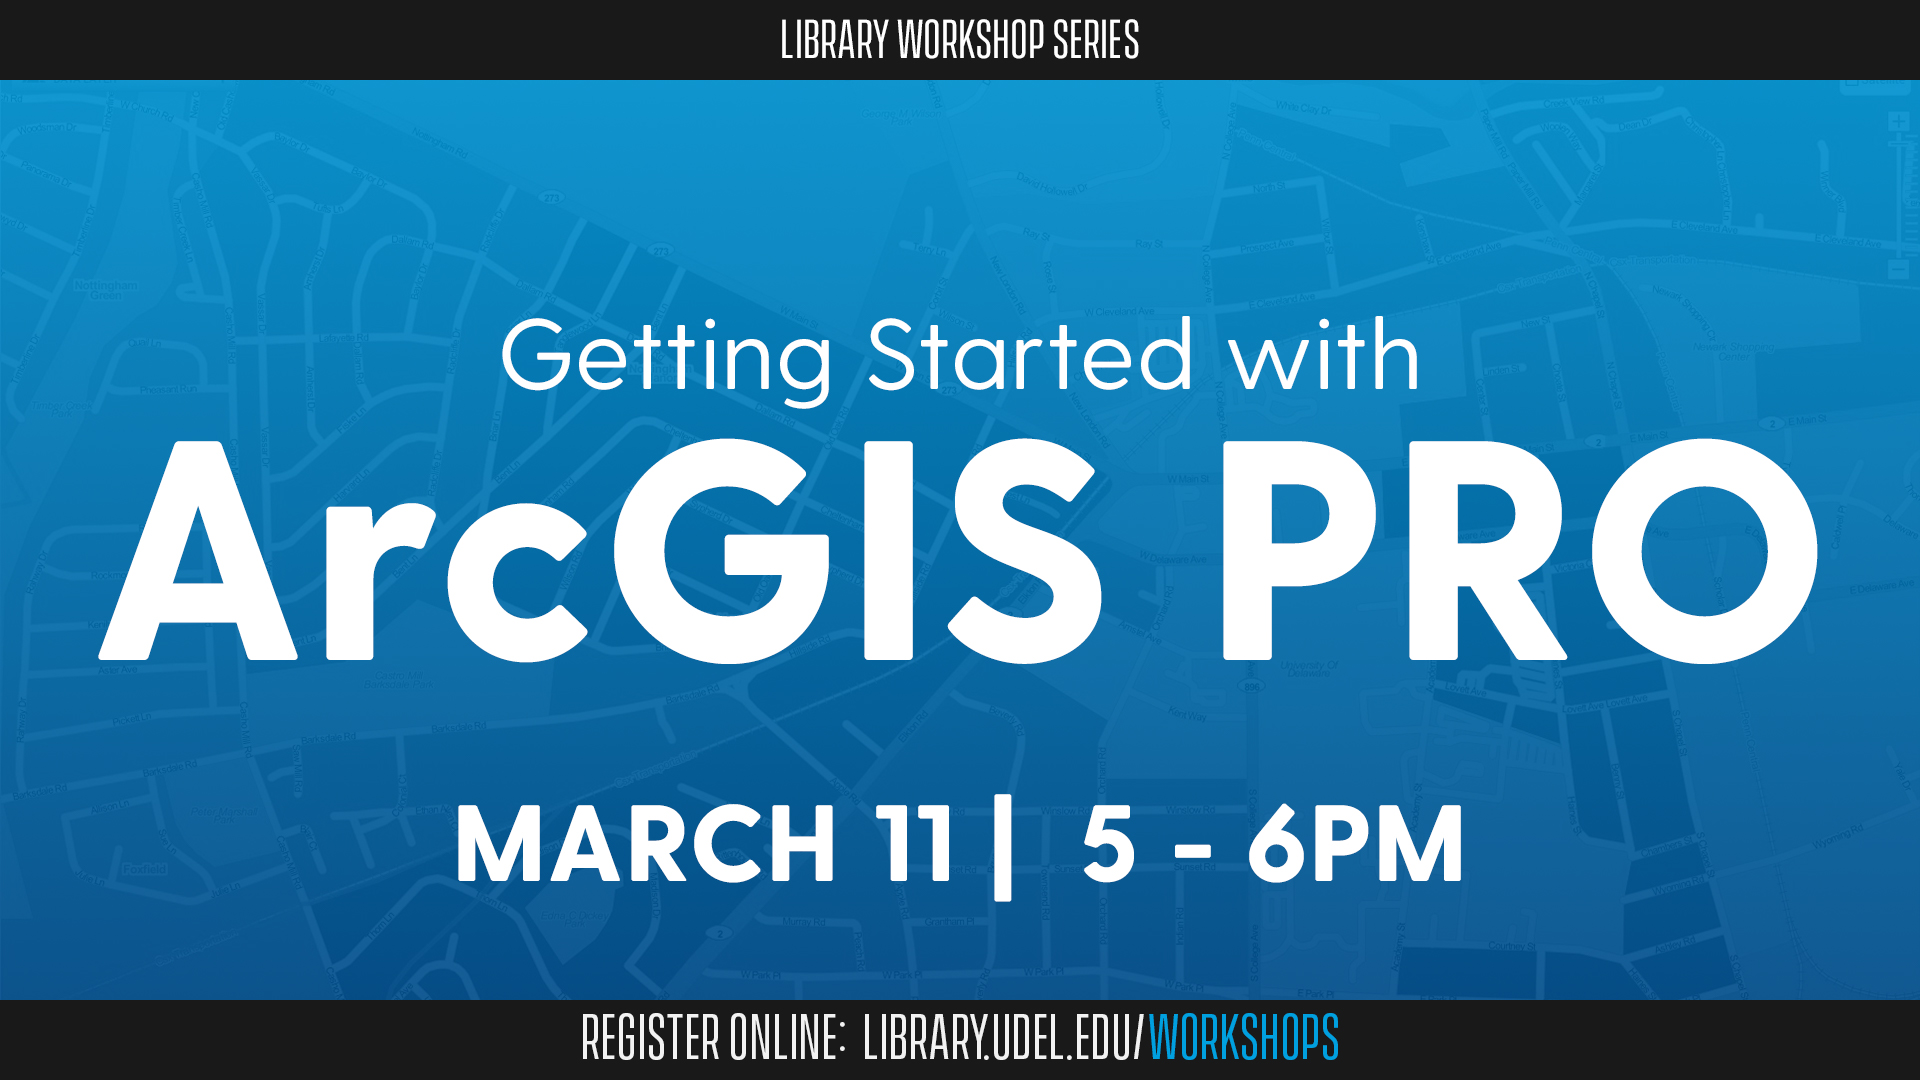 Promotional image for Getting Started with ArcGIS Pro